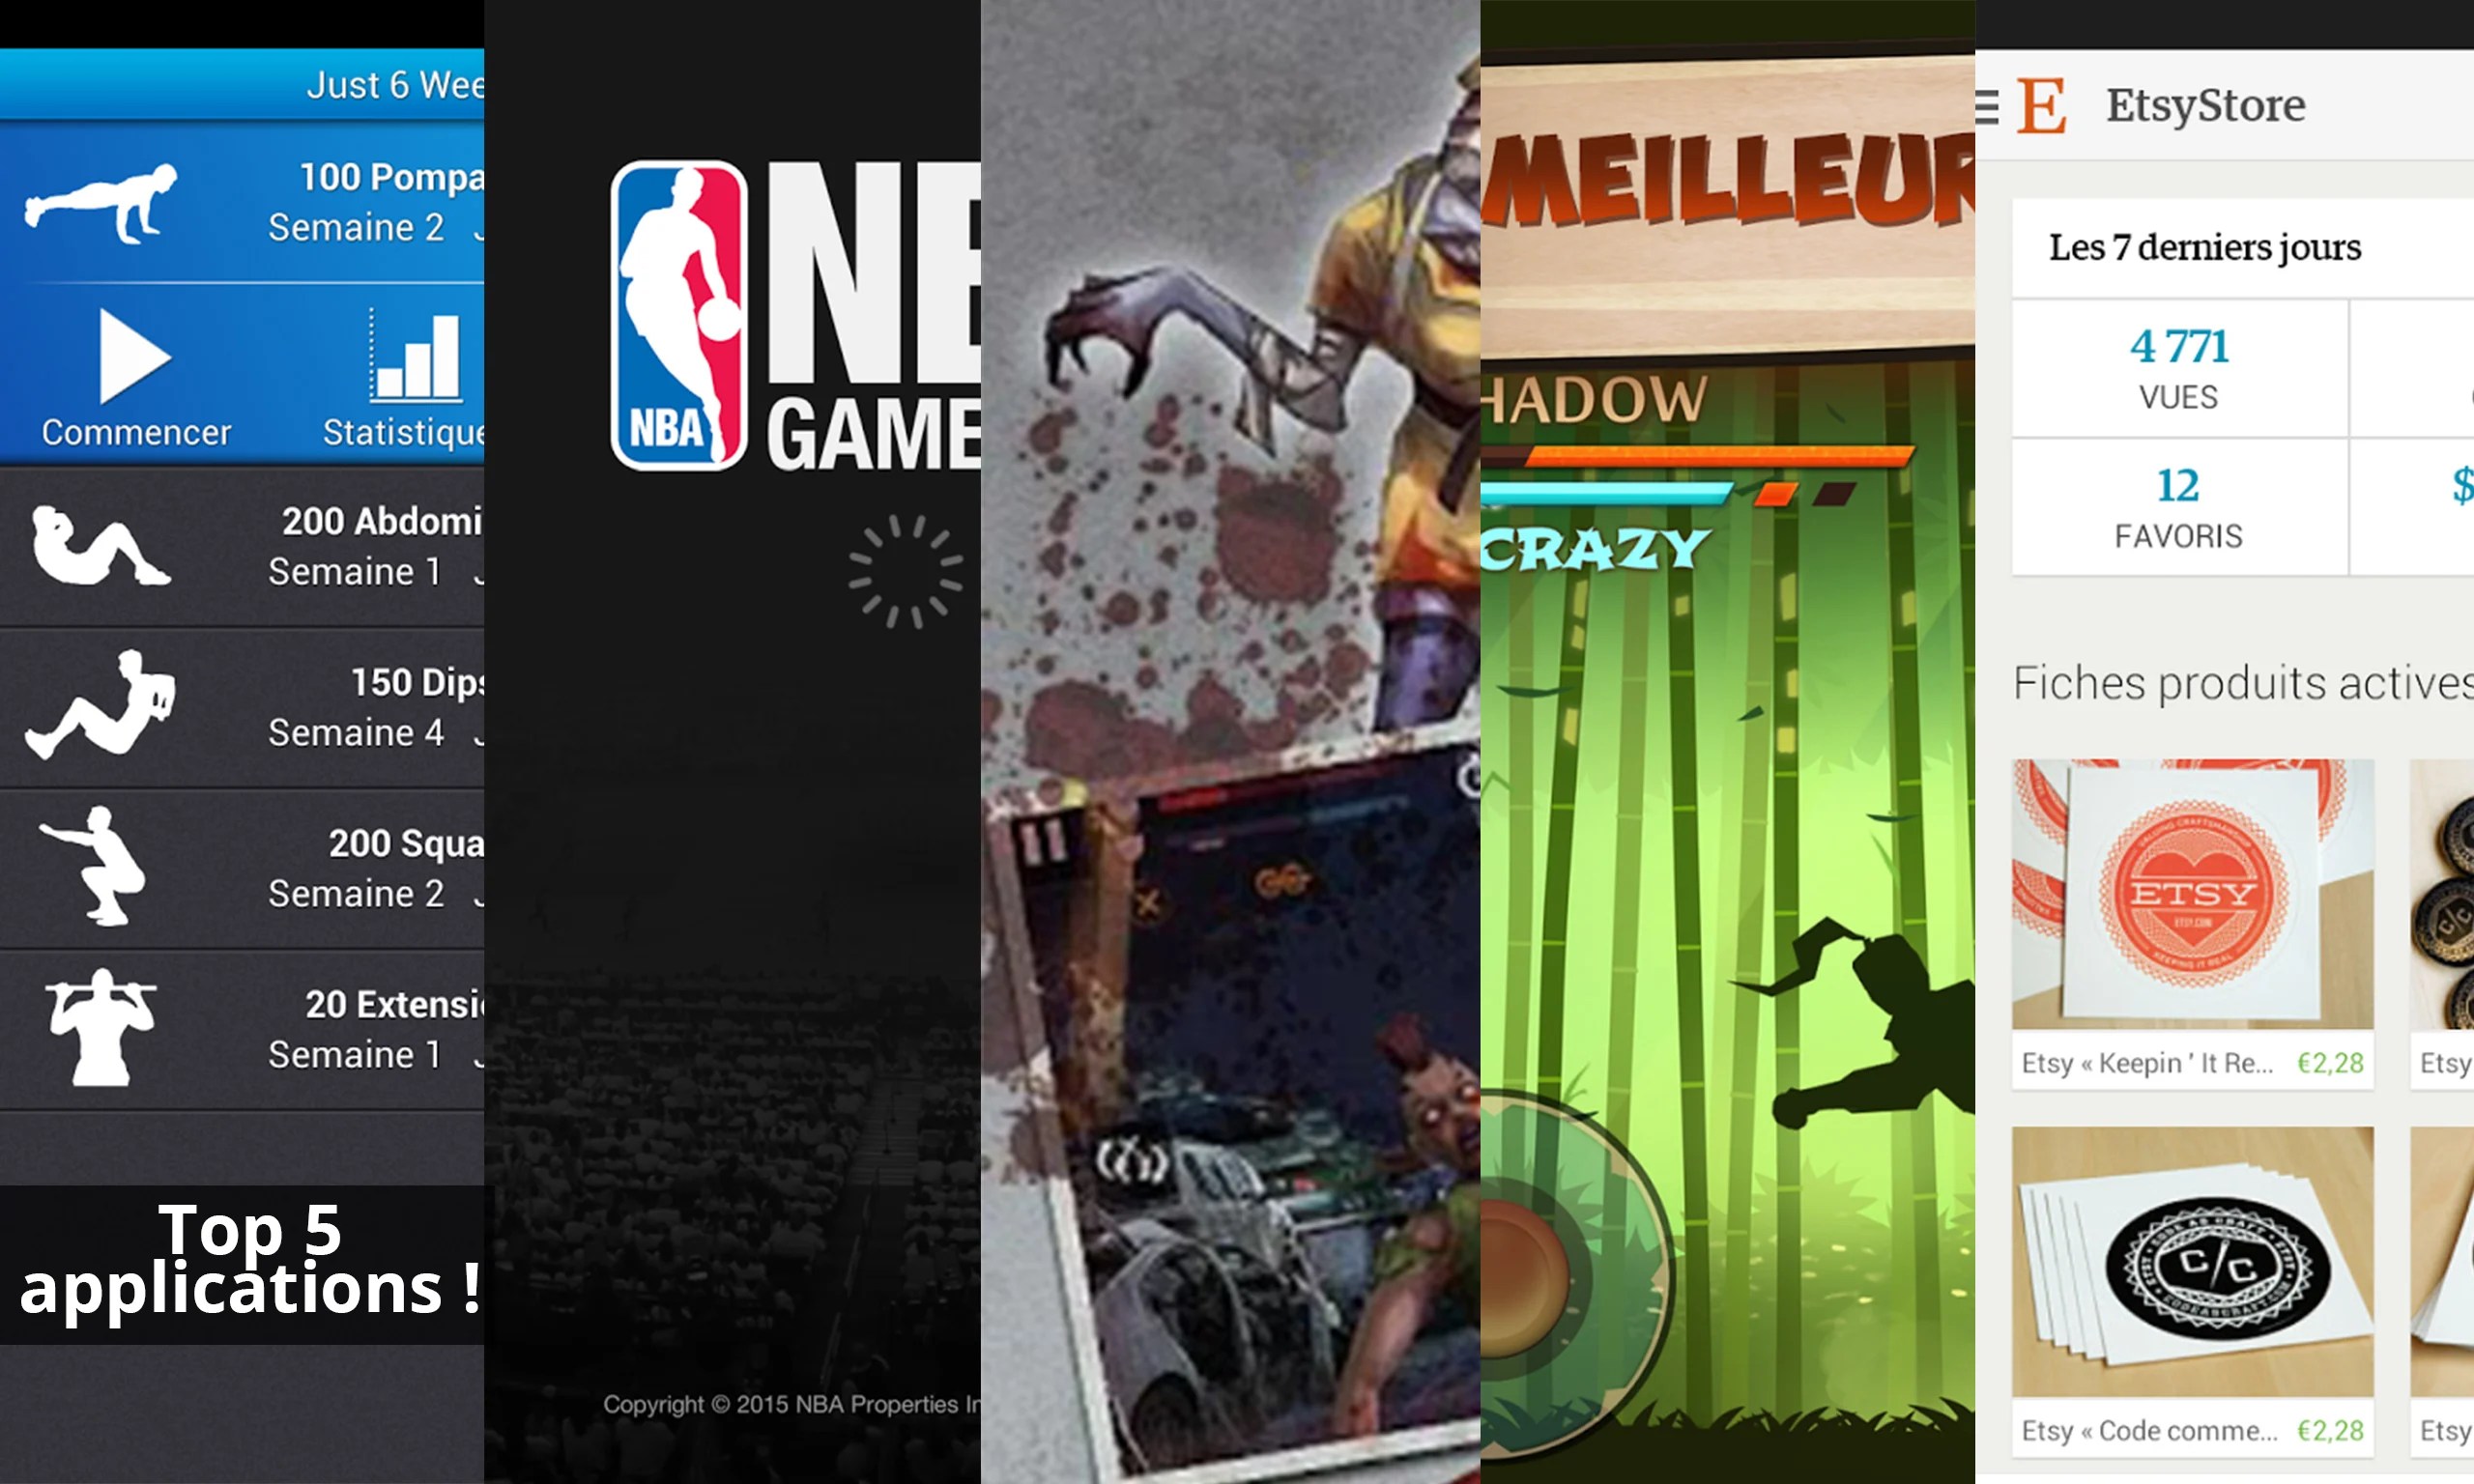 Les apps de la semaine : Just 6 weeks, NBA GAME TIME, Blood Zombies HD, Shadow Fight 2 et Etsy